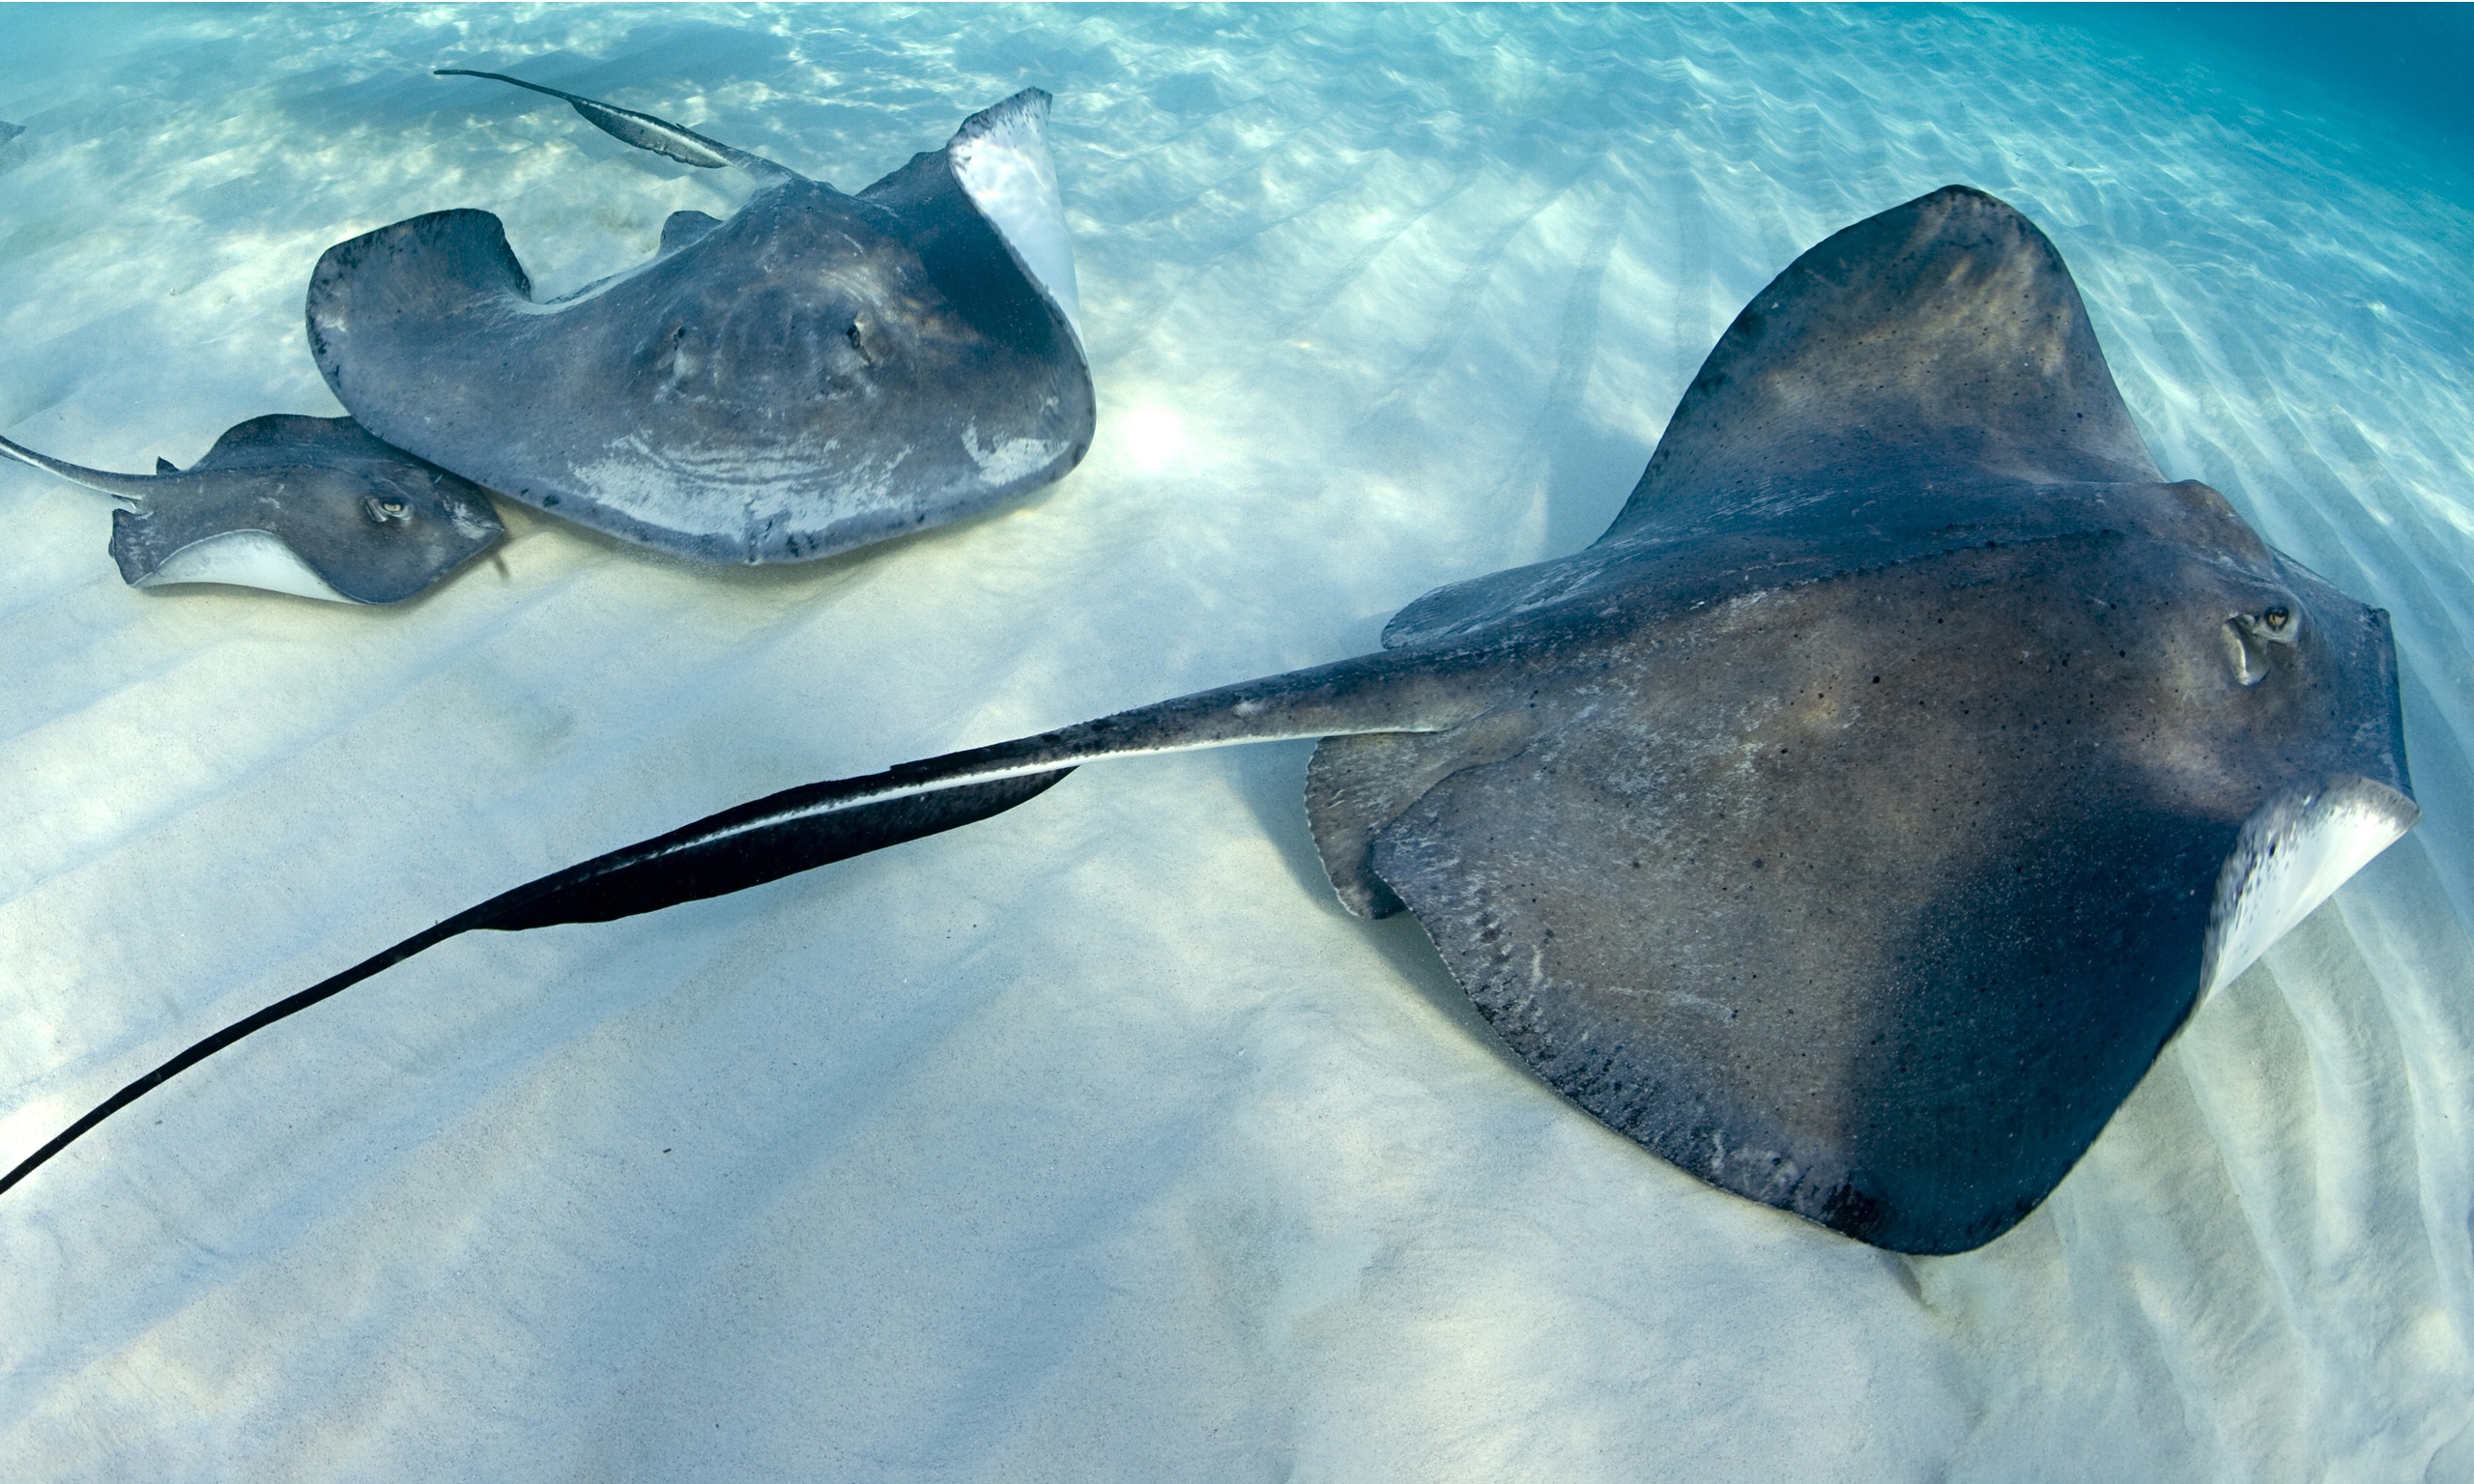 2560x1536 Stingray fishes photo and wallpaper. Cute Stingray fishes pictures